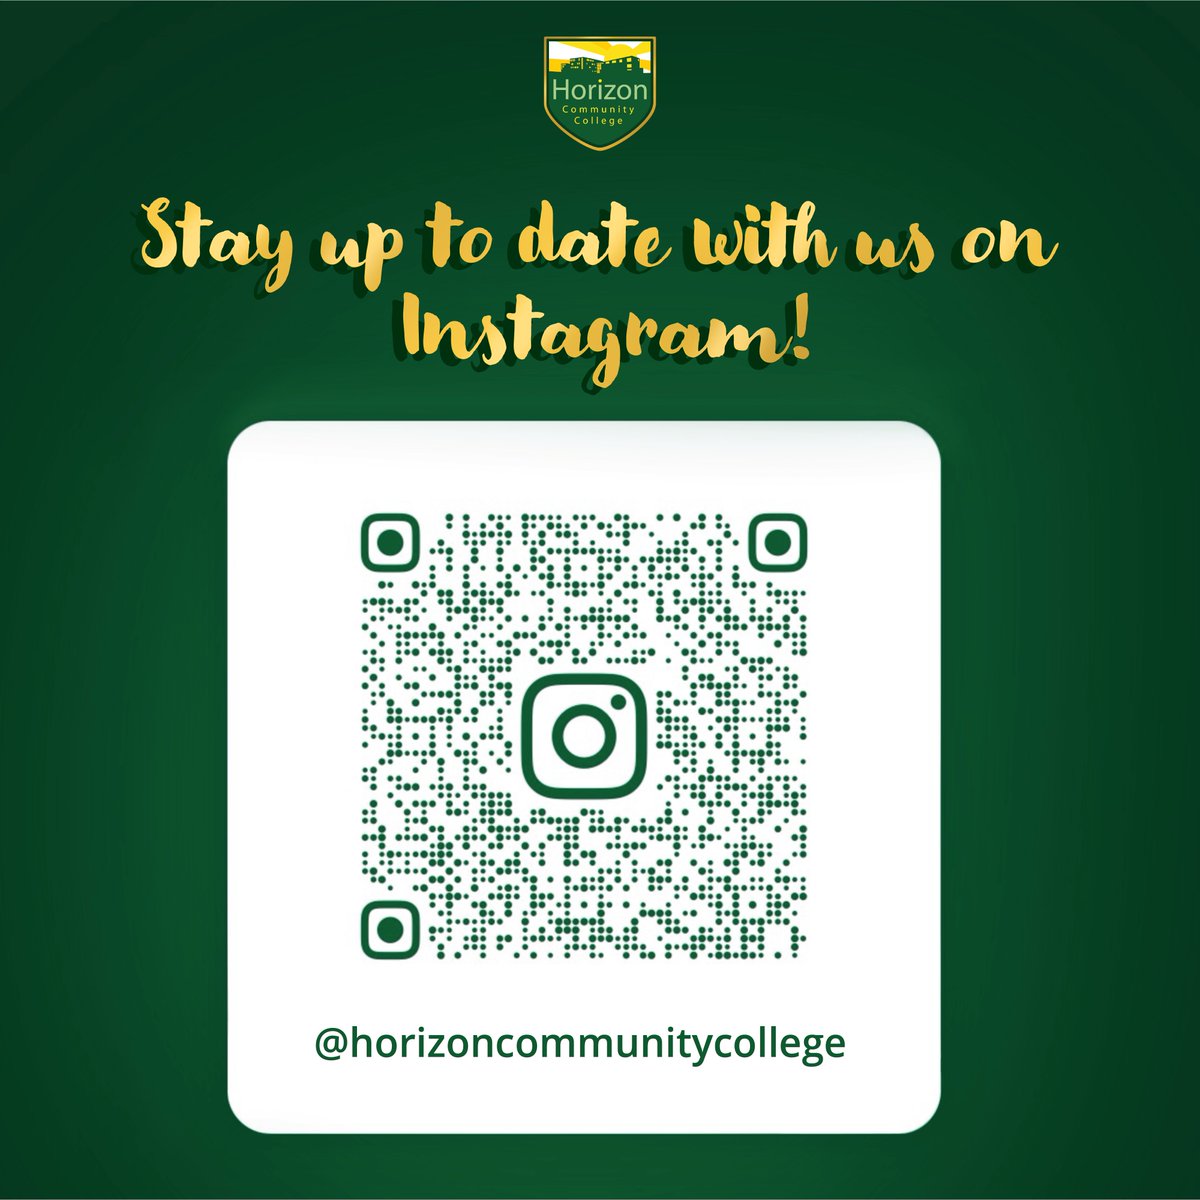 Stay up to date with us throughout the Half Term by following our Instagram! Simply scan the QR code below or follow the link: instagram.com/horizoncommuni…